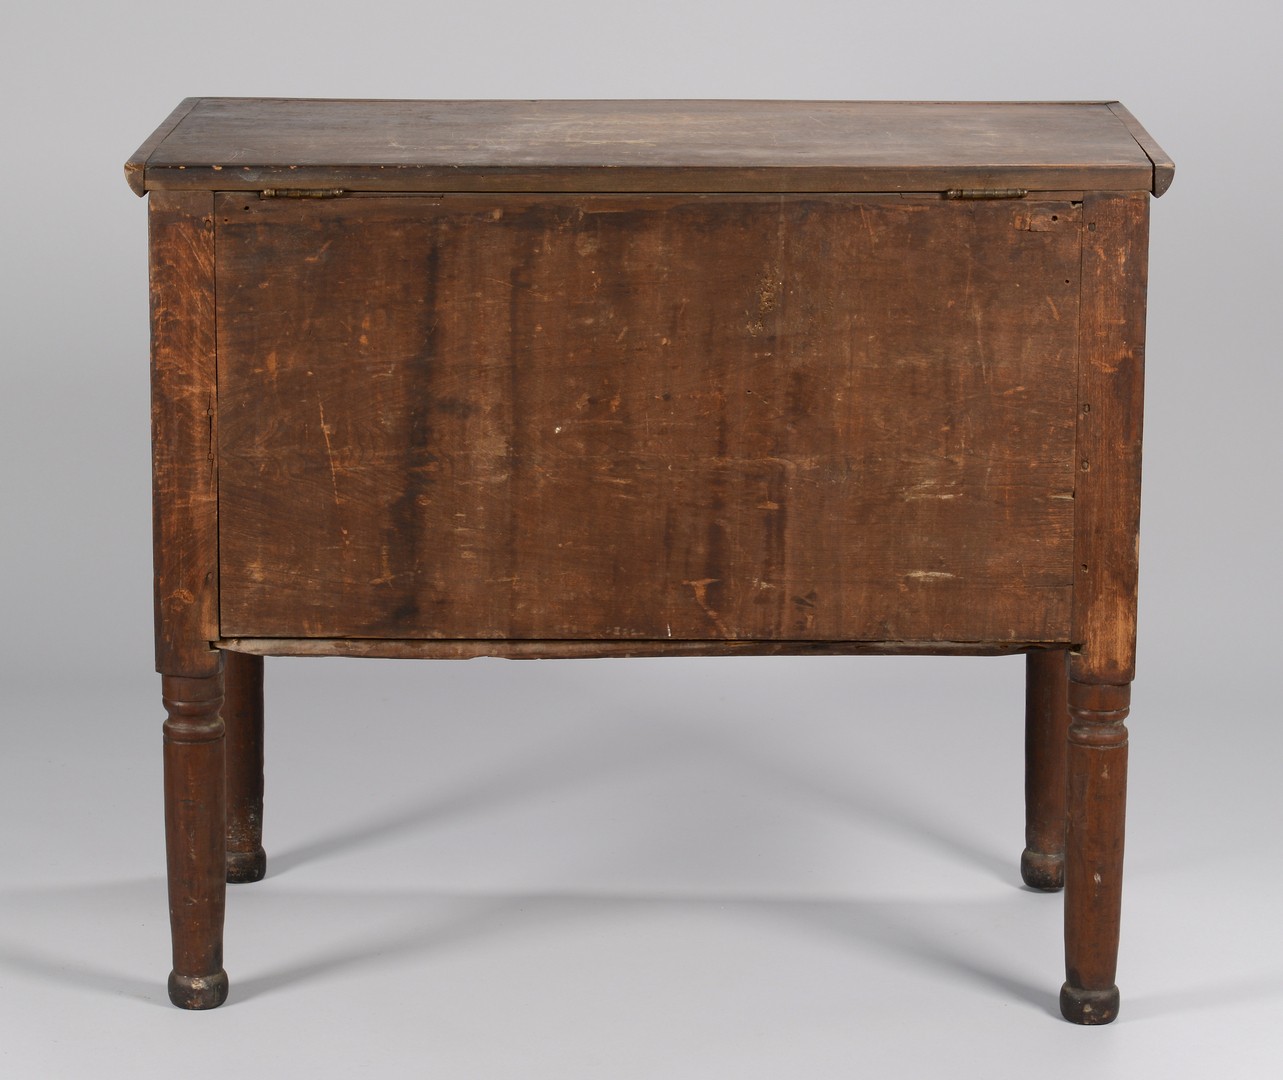 Lot 161: Southern Blanket Chest on Tall Turned Legs